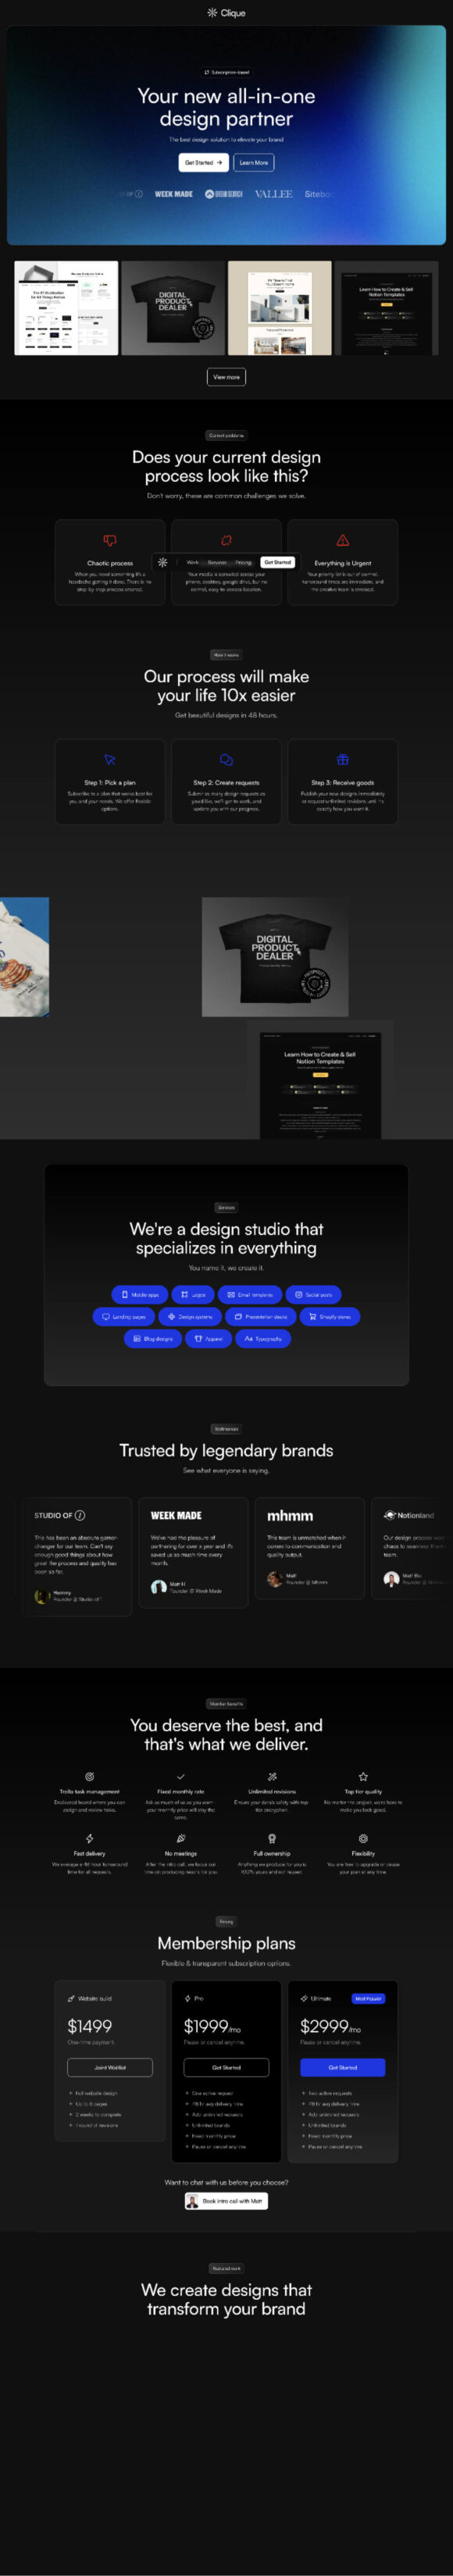 Full preview of the landing page